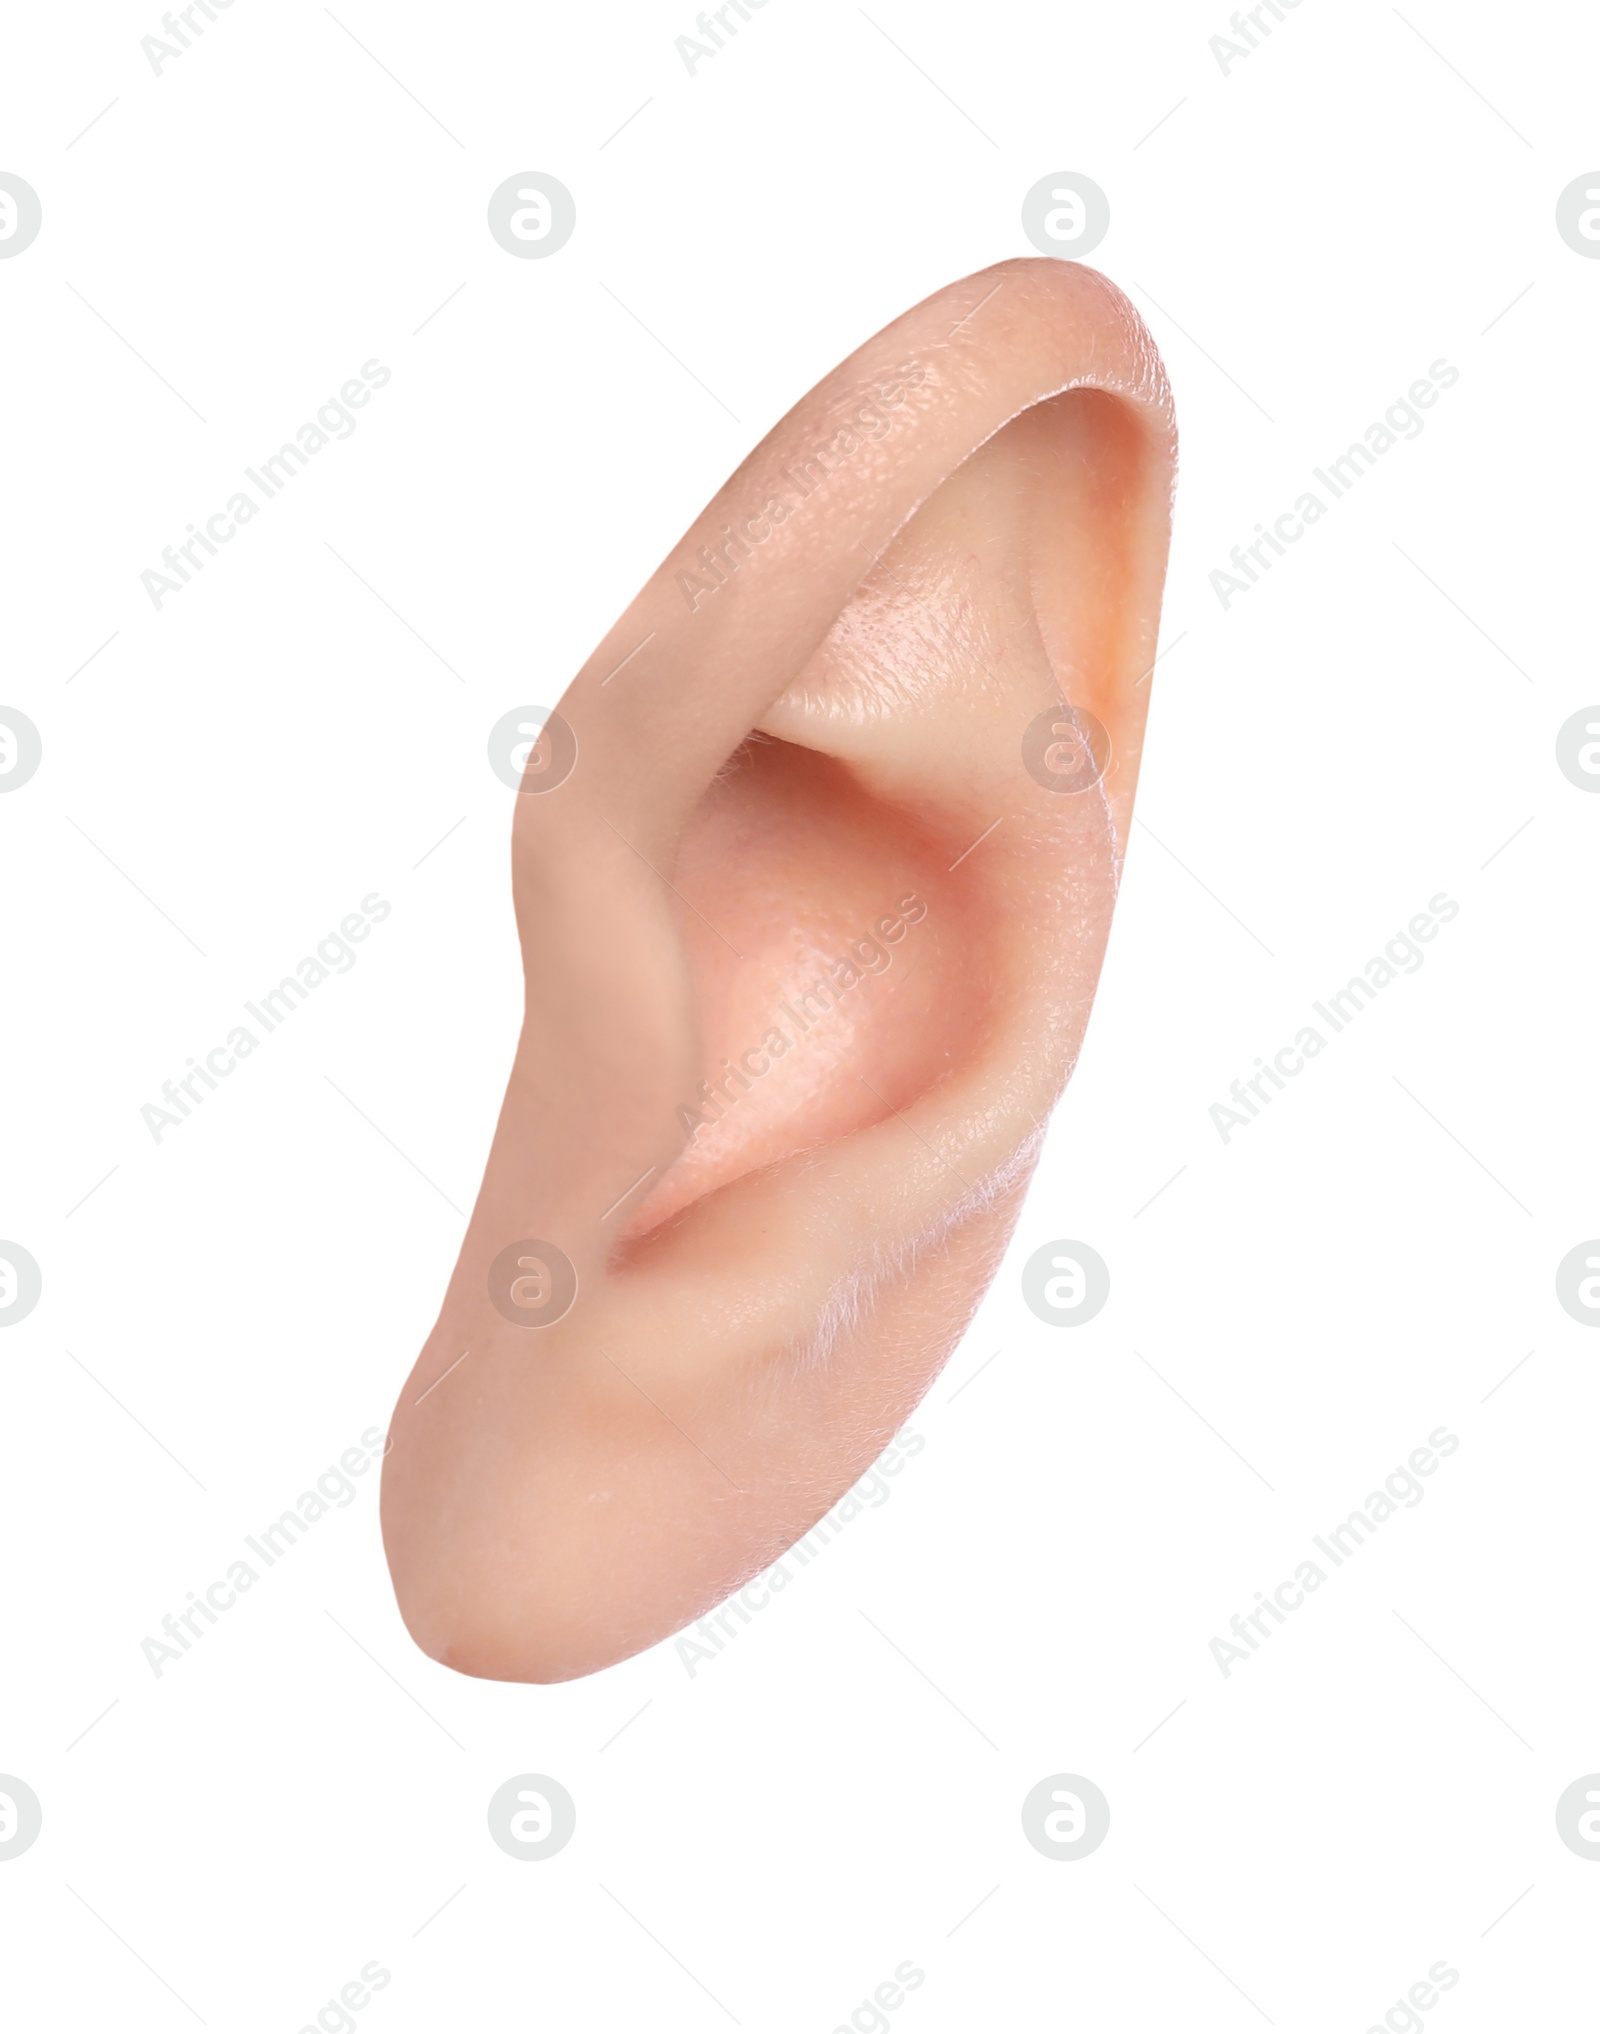 Image of Human ear isolated on white. Organ of hearing and balance